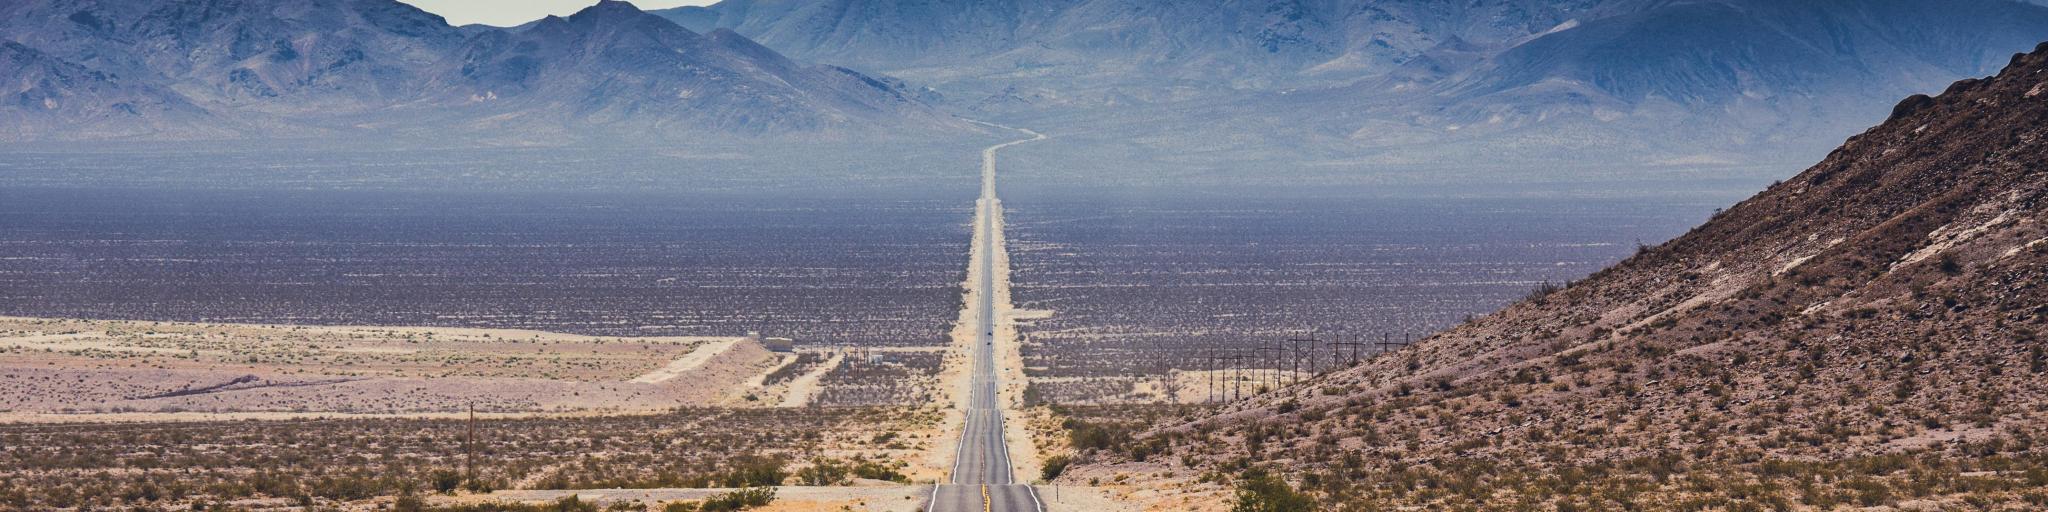 Route 66, USA with a classic panorama view of an endless straight road running through the barren scenery of the American Southwest with extreme heat haze on a beautiful hot sunny day with blue sky in summer